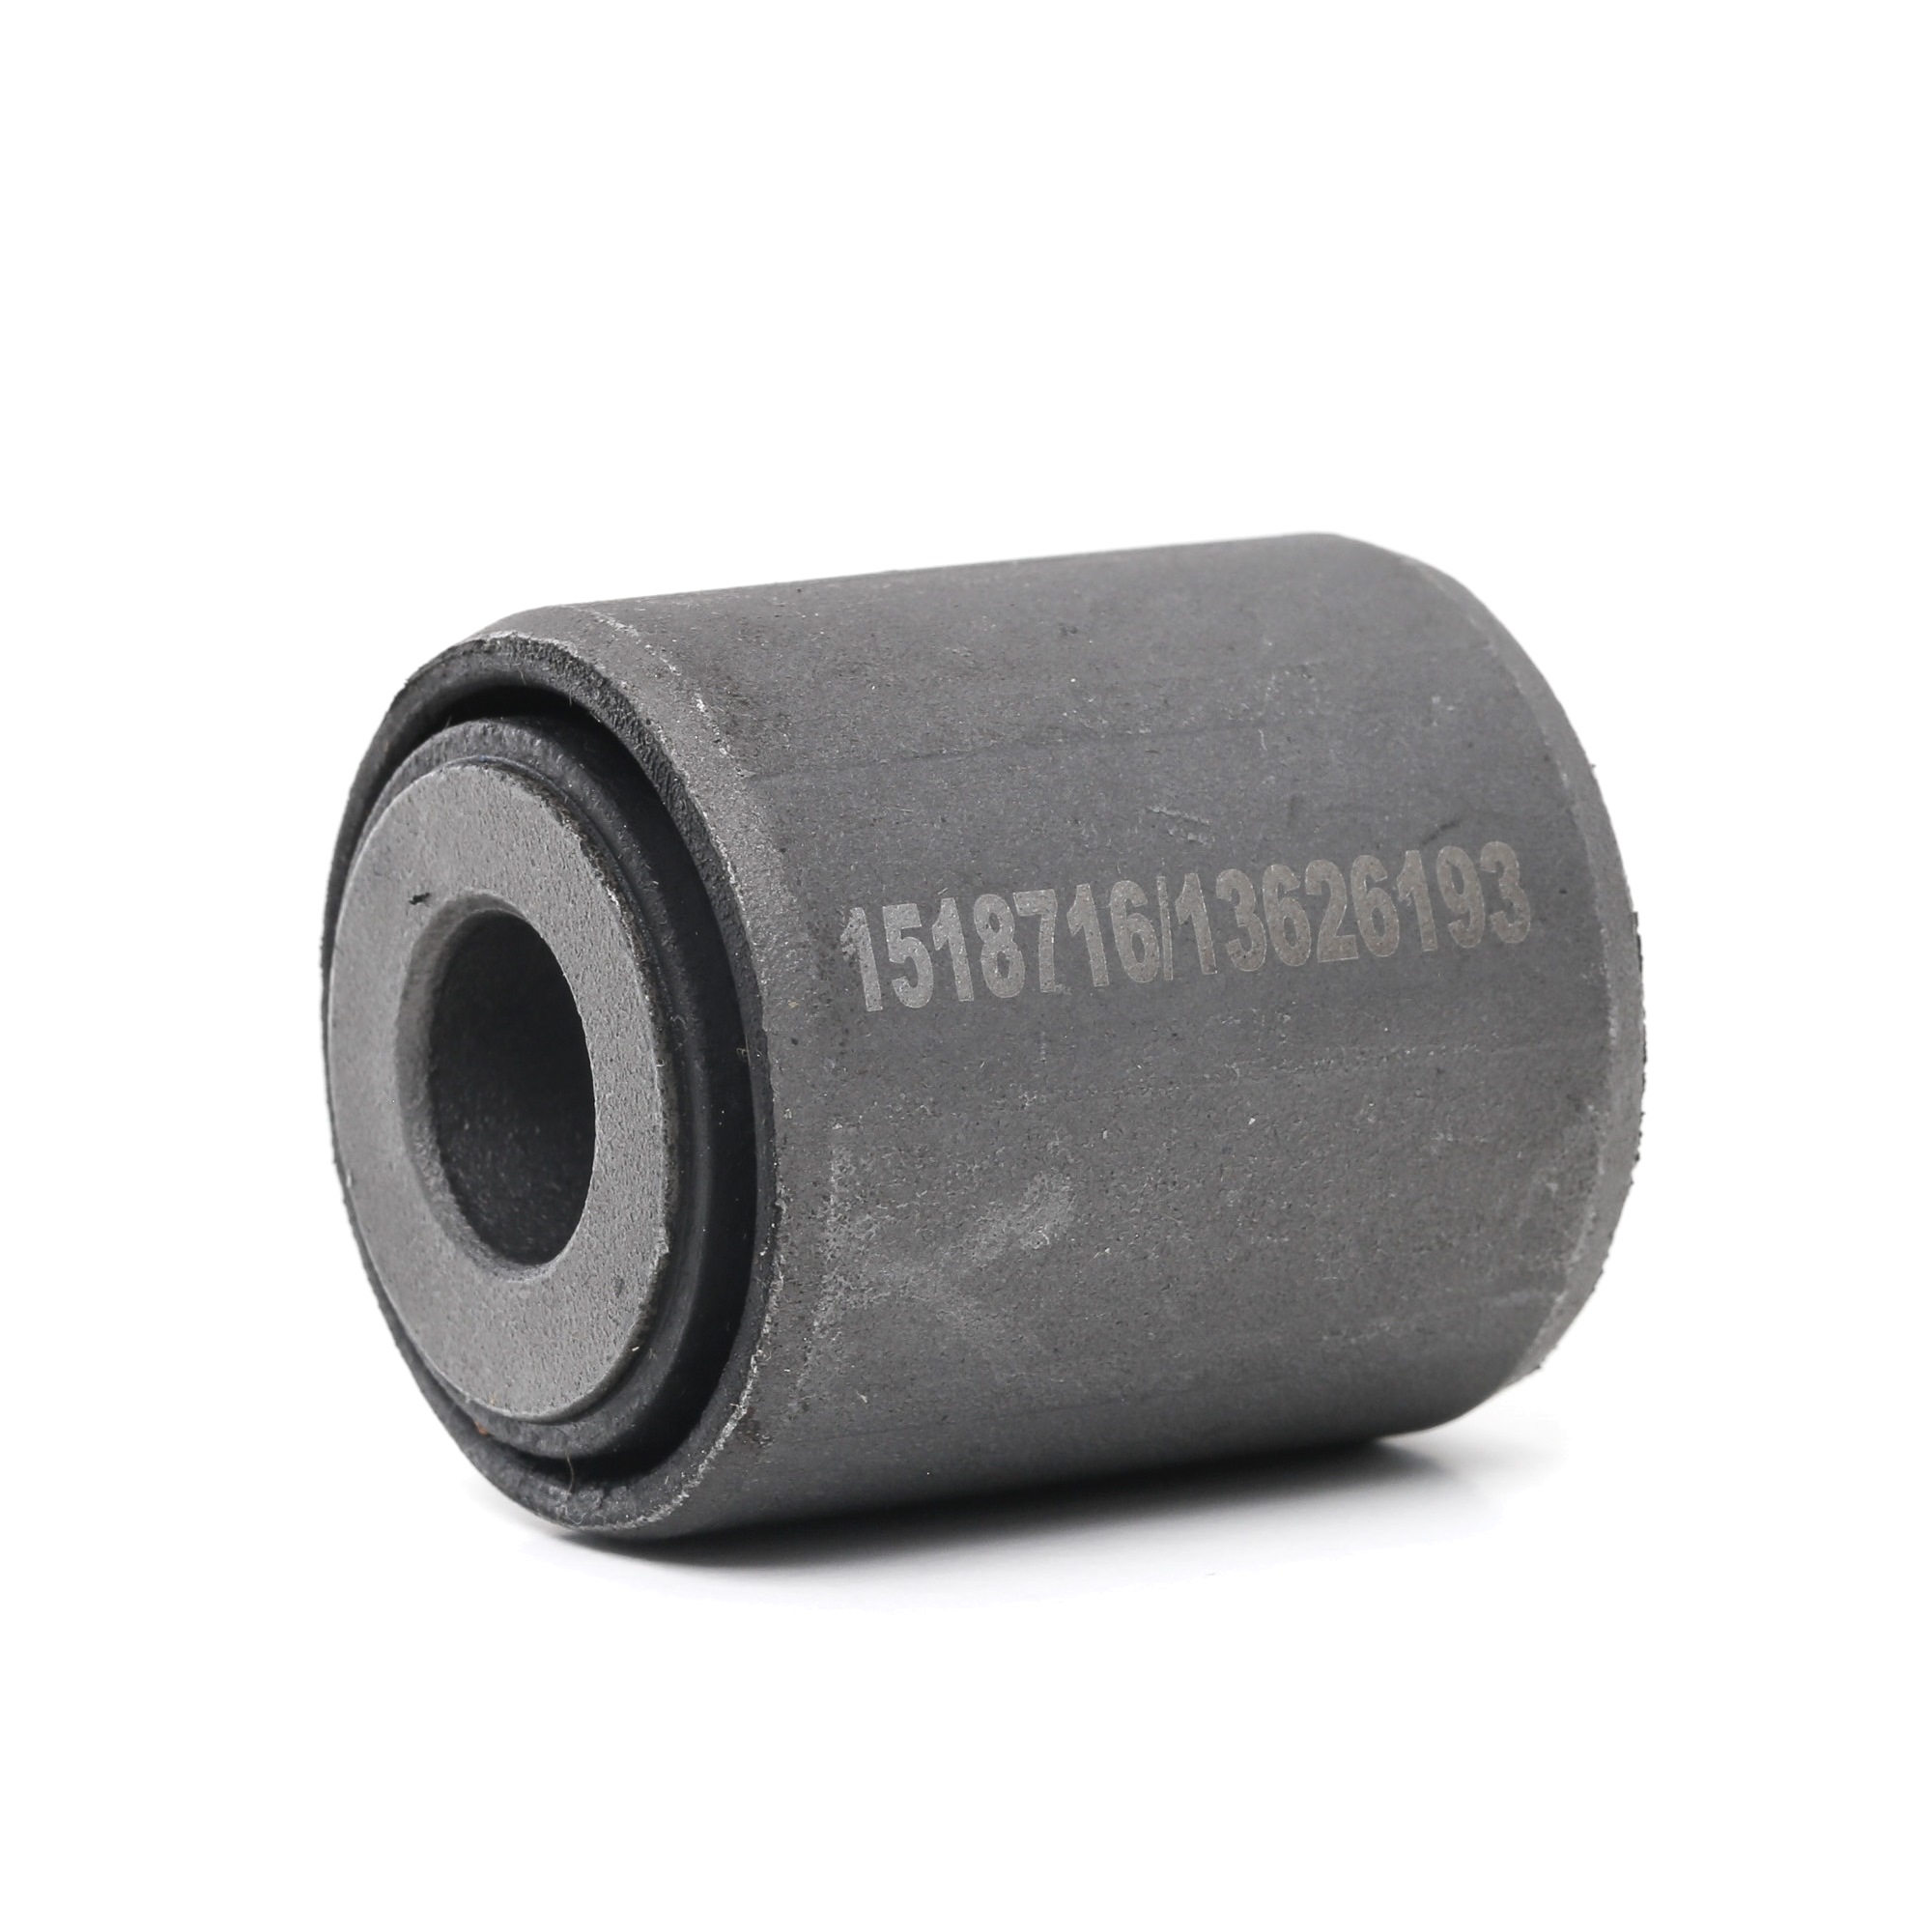 251T0385 RIDEX Suspension bushes MINI Rear Axle, both sides, Upper, Lower, inner, outer, 40mm, Rubber-Metal Mount